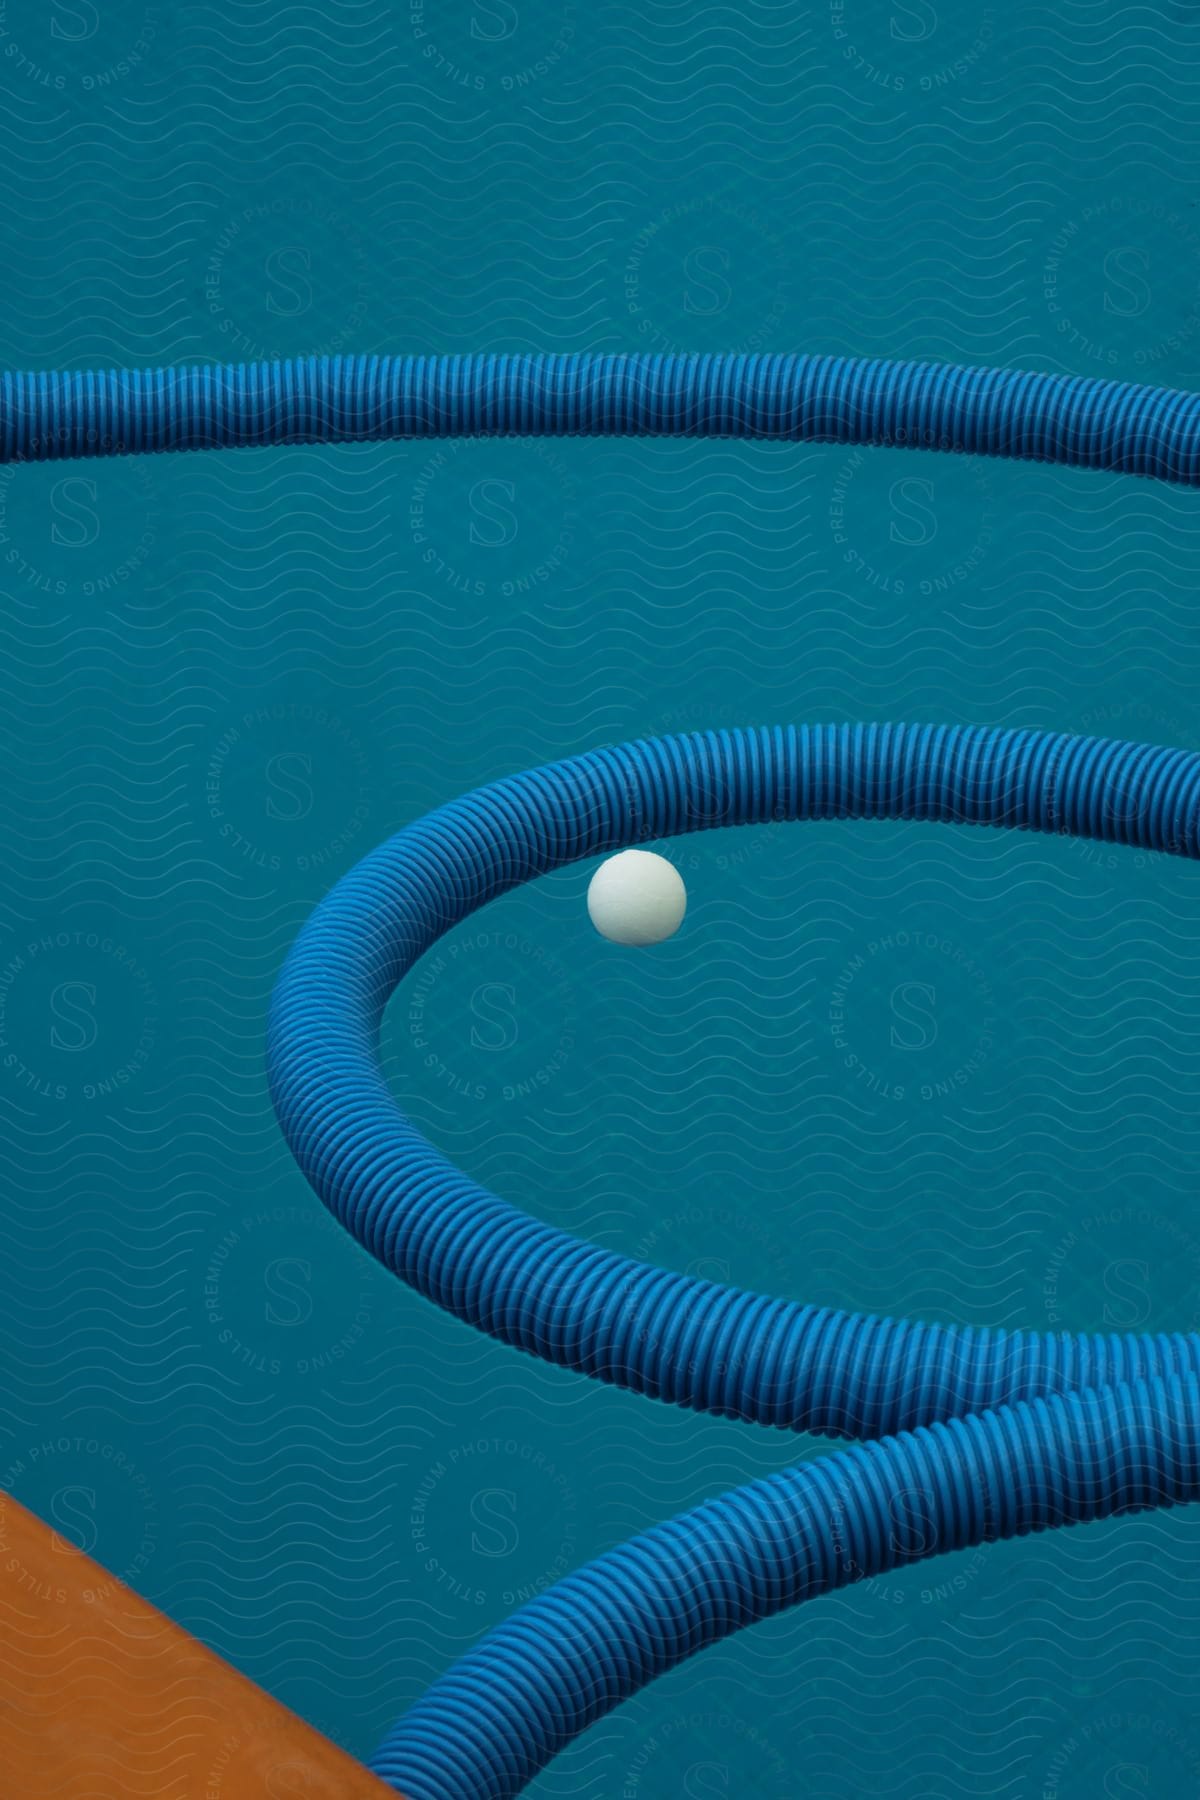 A blue hose curves around a white small ball on a blue surface